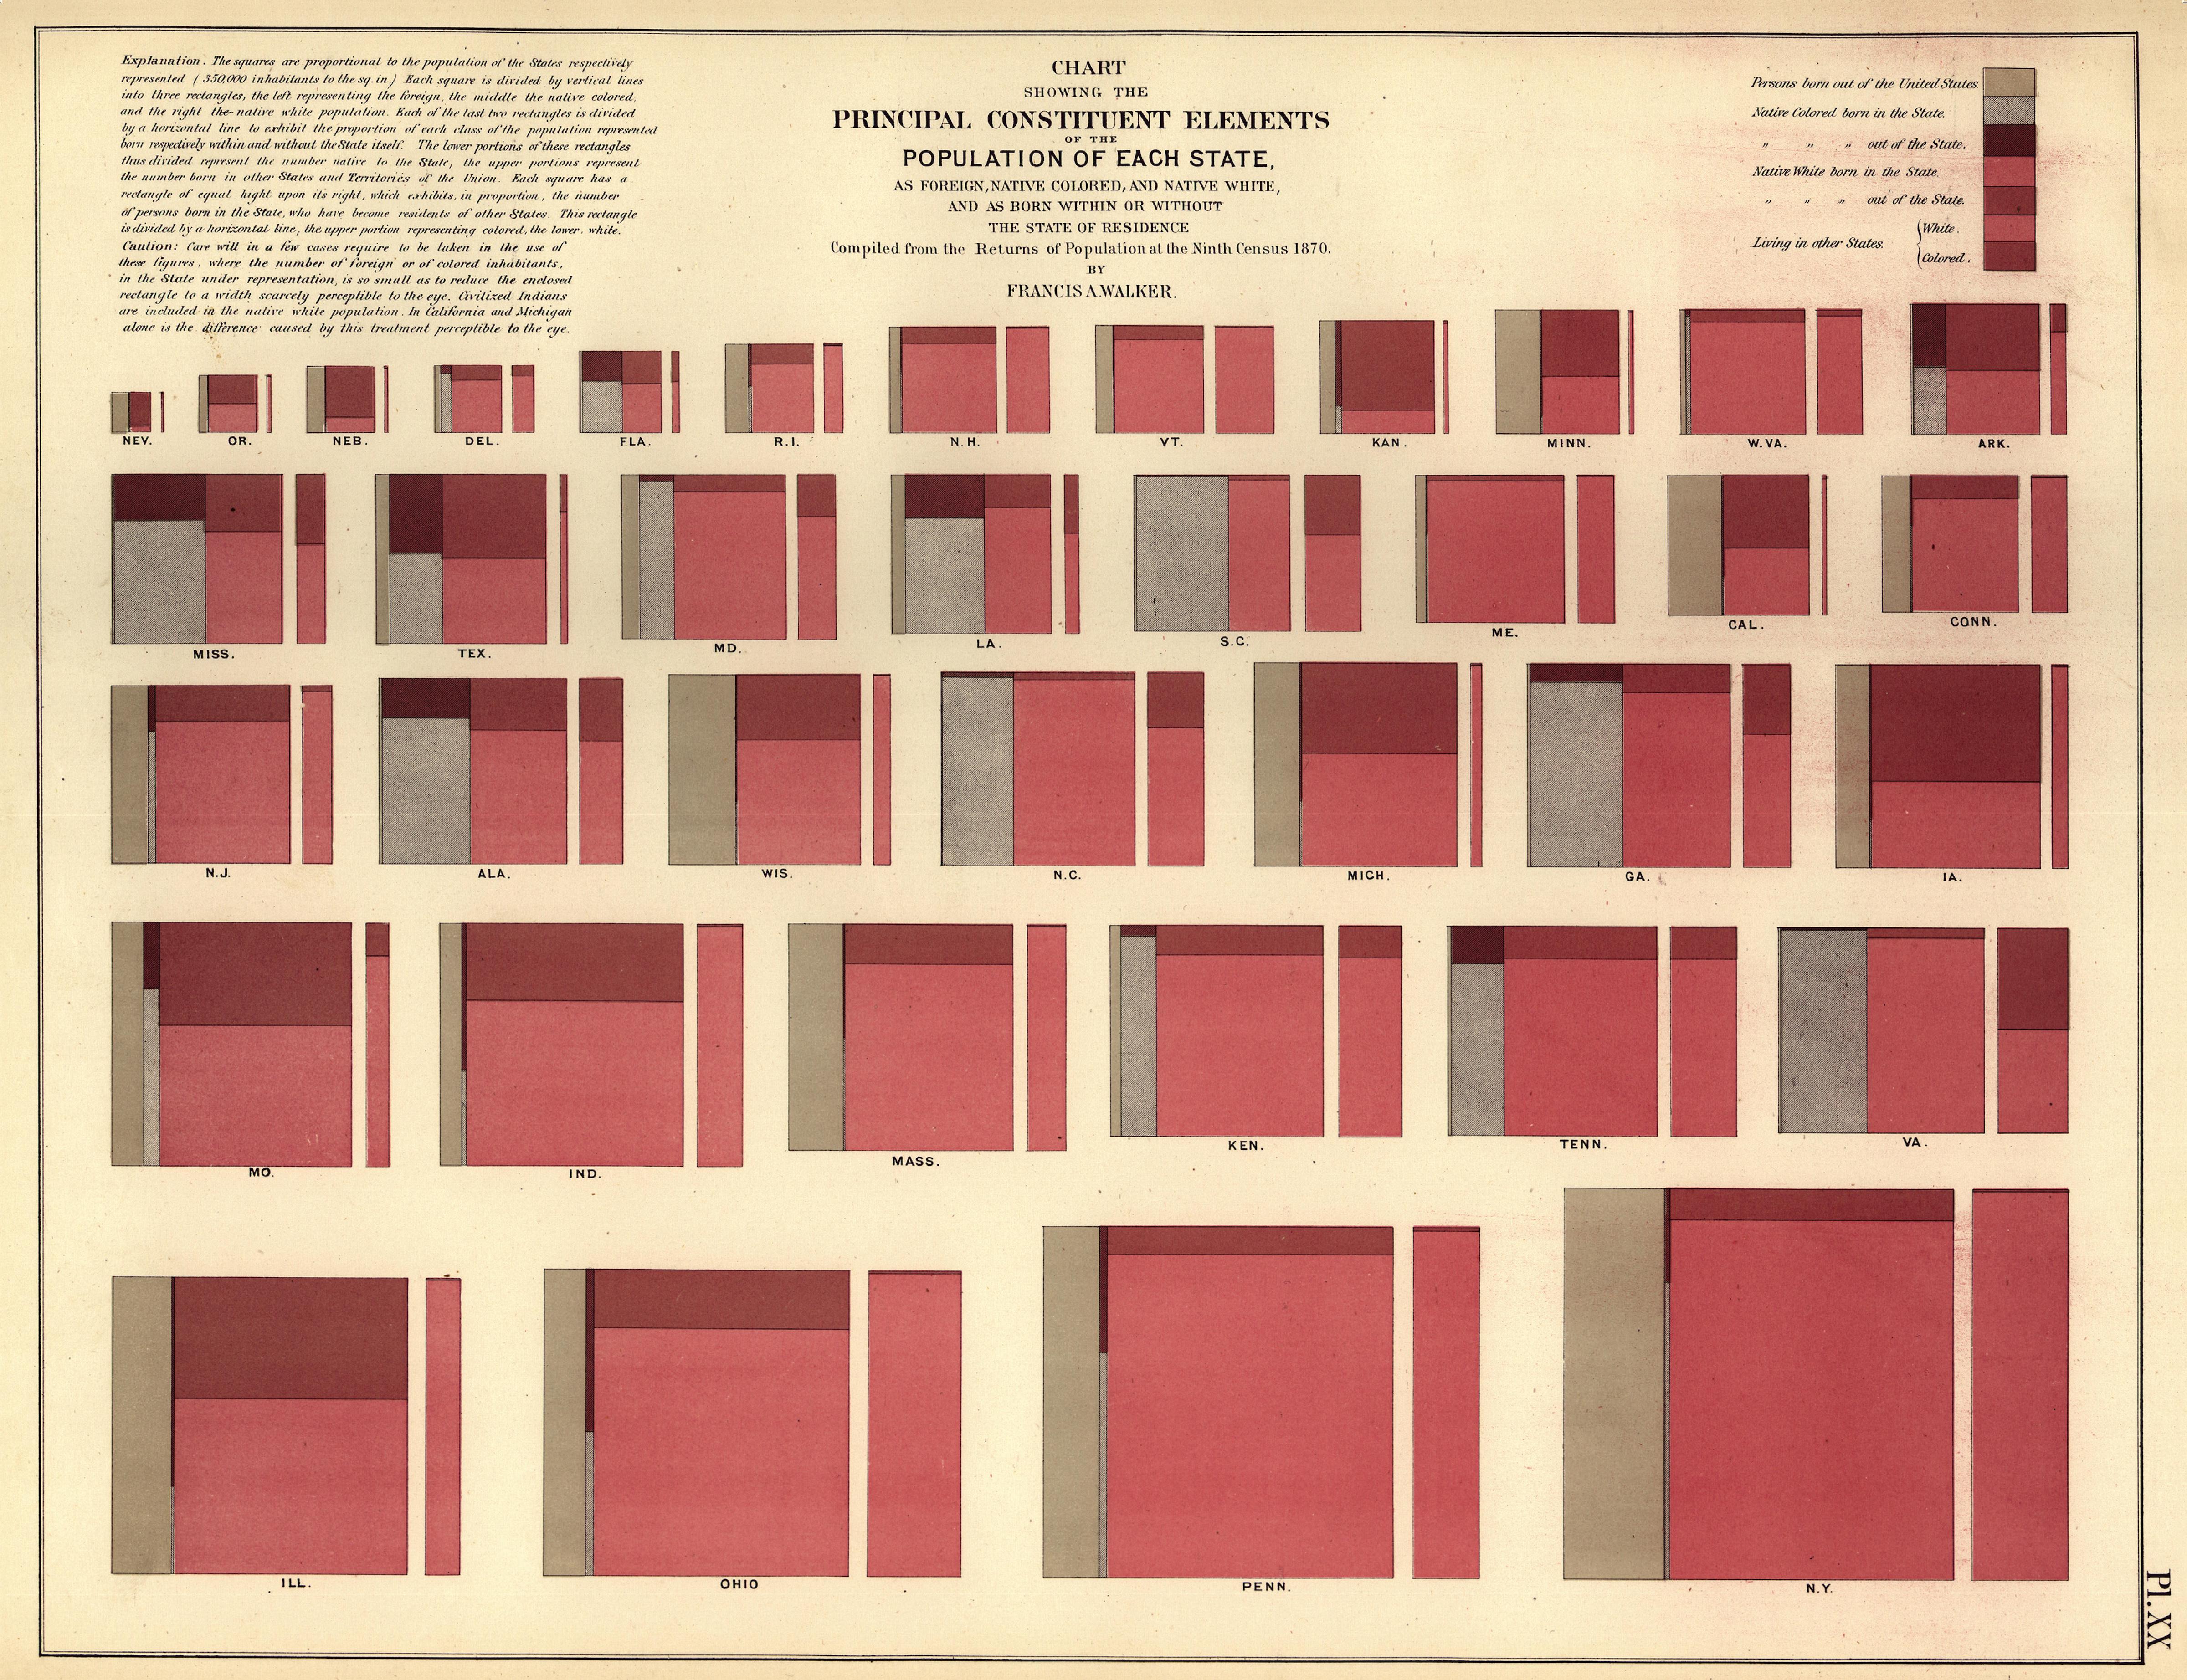 Chart Showing the Principal Constituent Elements of the Population of Each State, 1870